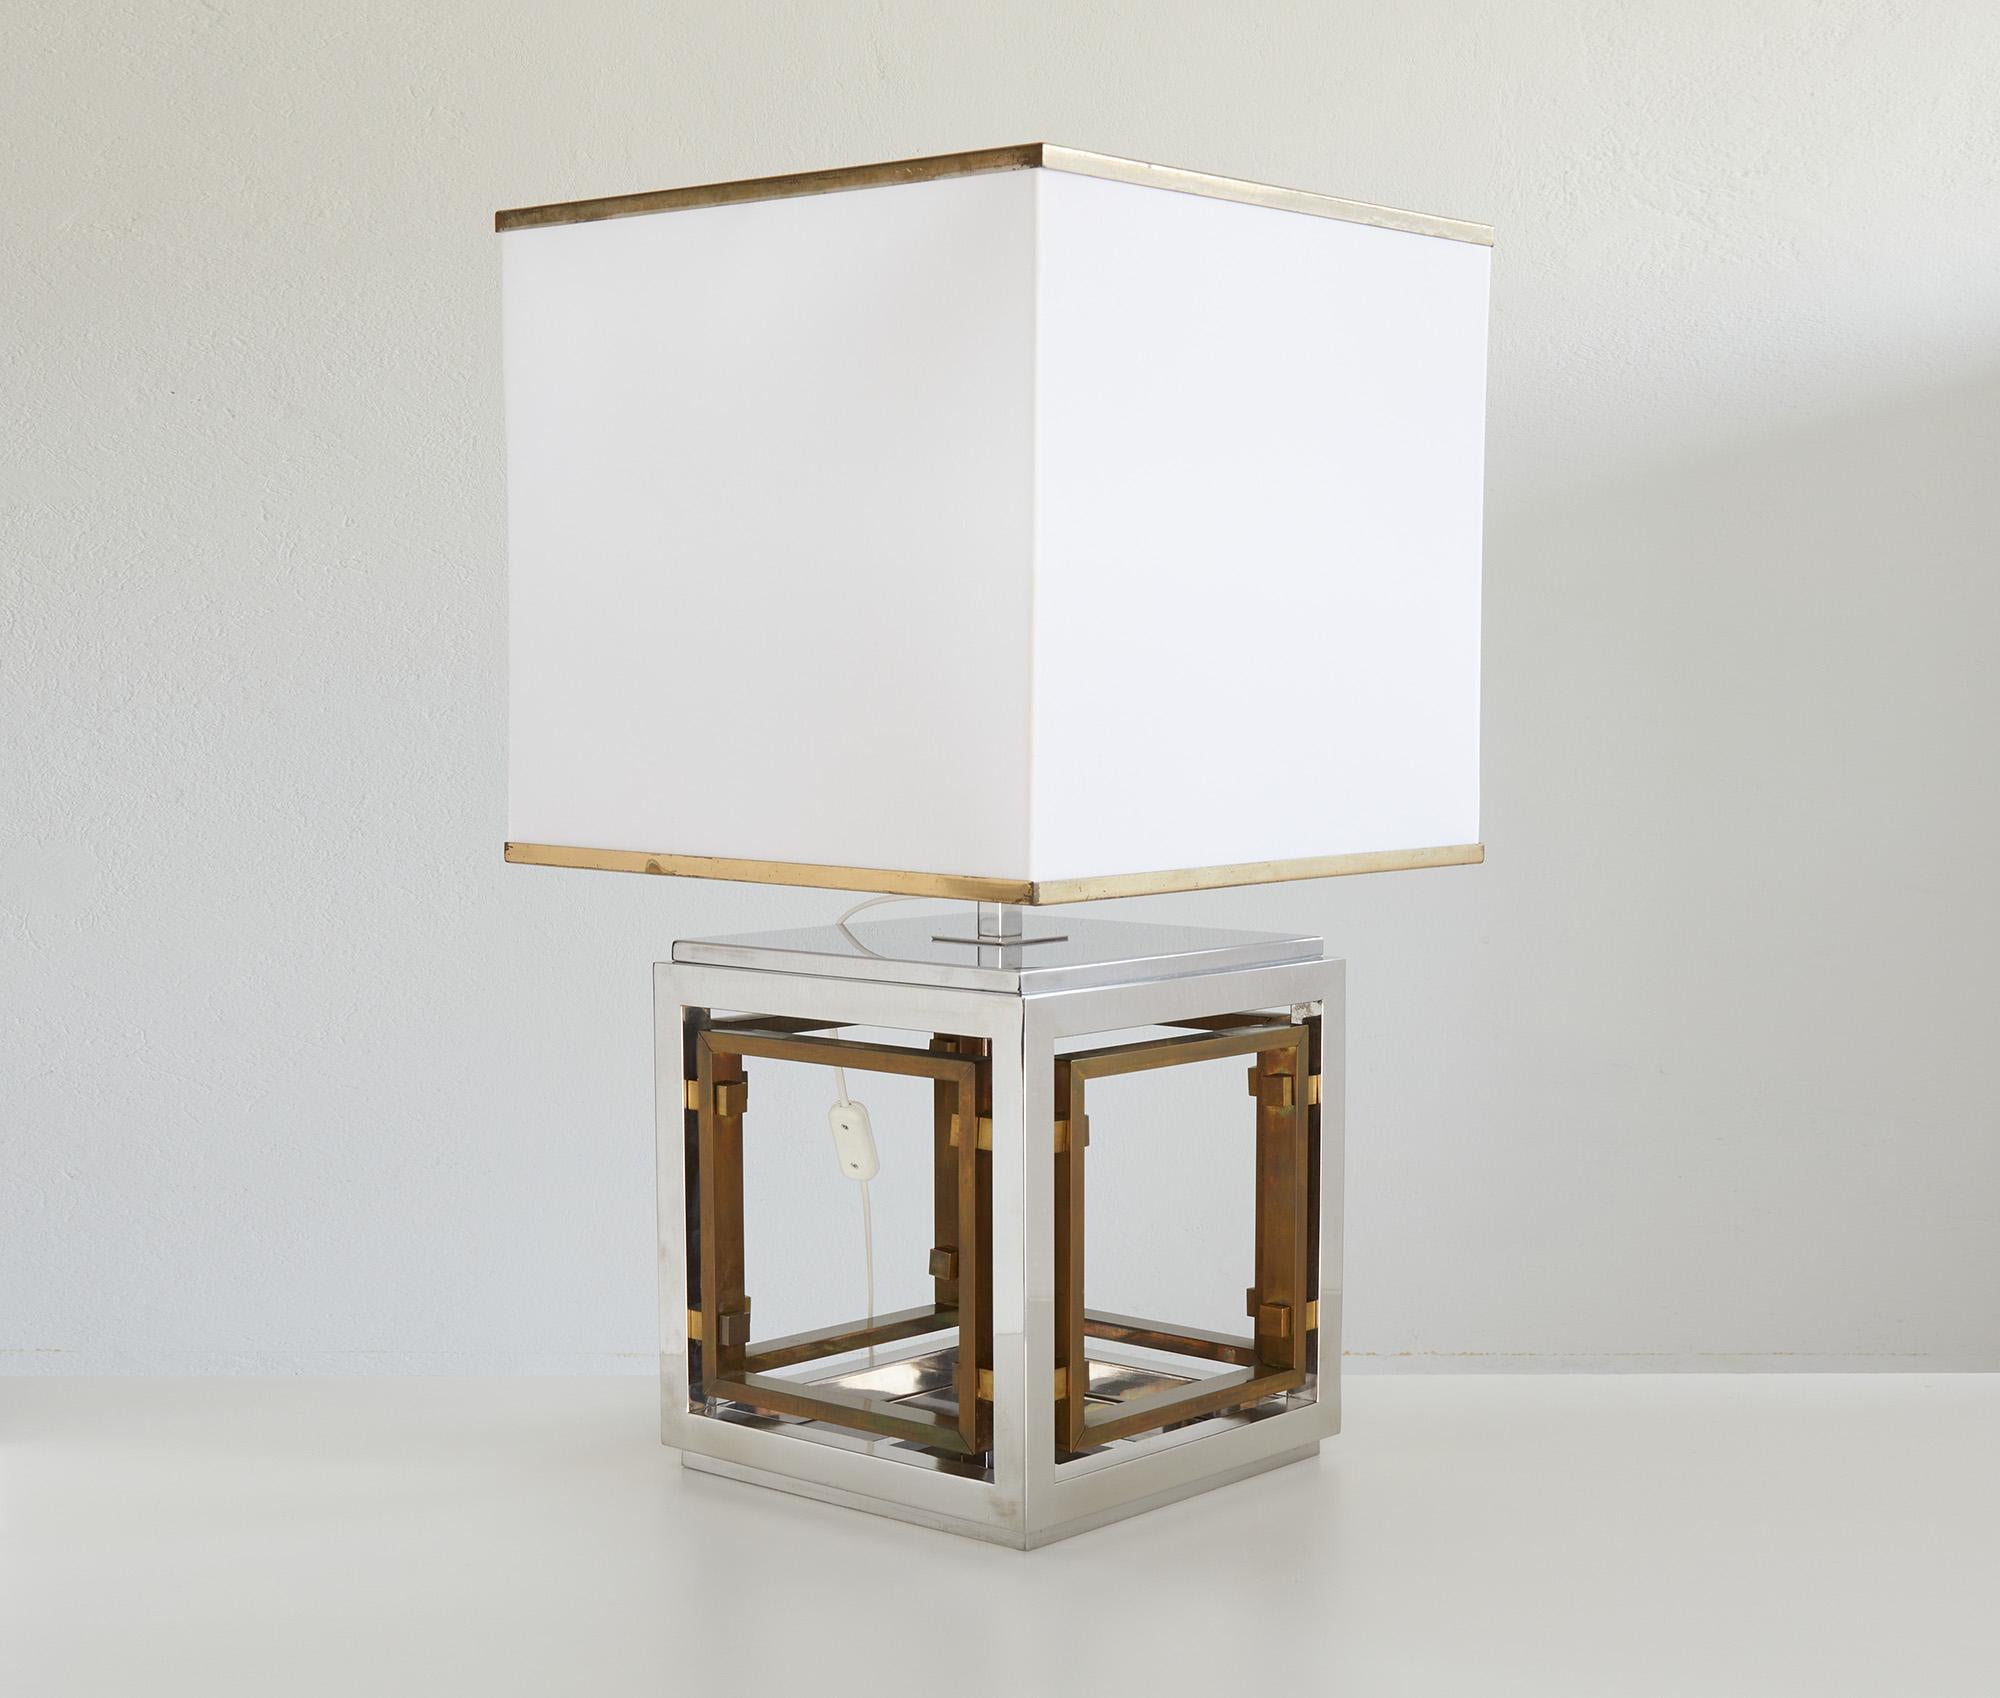 Beautiful and elegant table lamp designed by Romeo Rega. 

Romeo Rega was an Italian designer known for his high-quality and sophisticated furniture and lighting designs, particularly in the 1970 and 1980.

The combination of chromed metal and brass